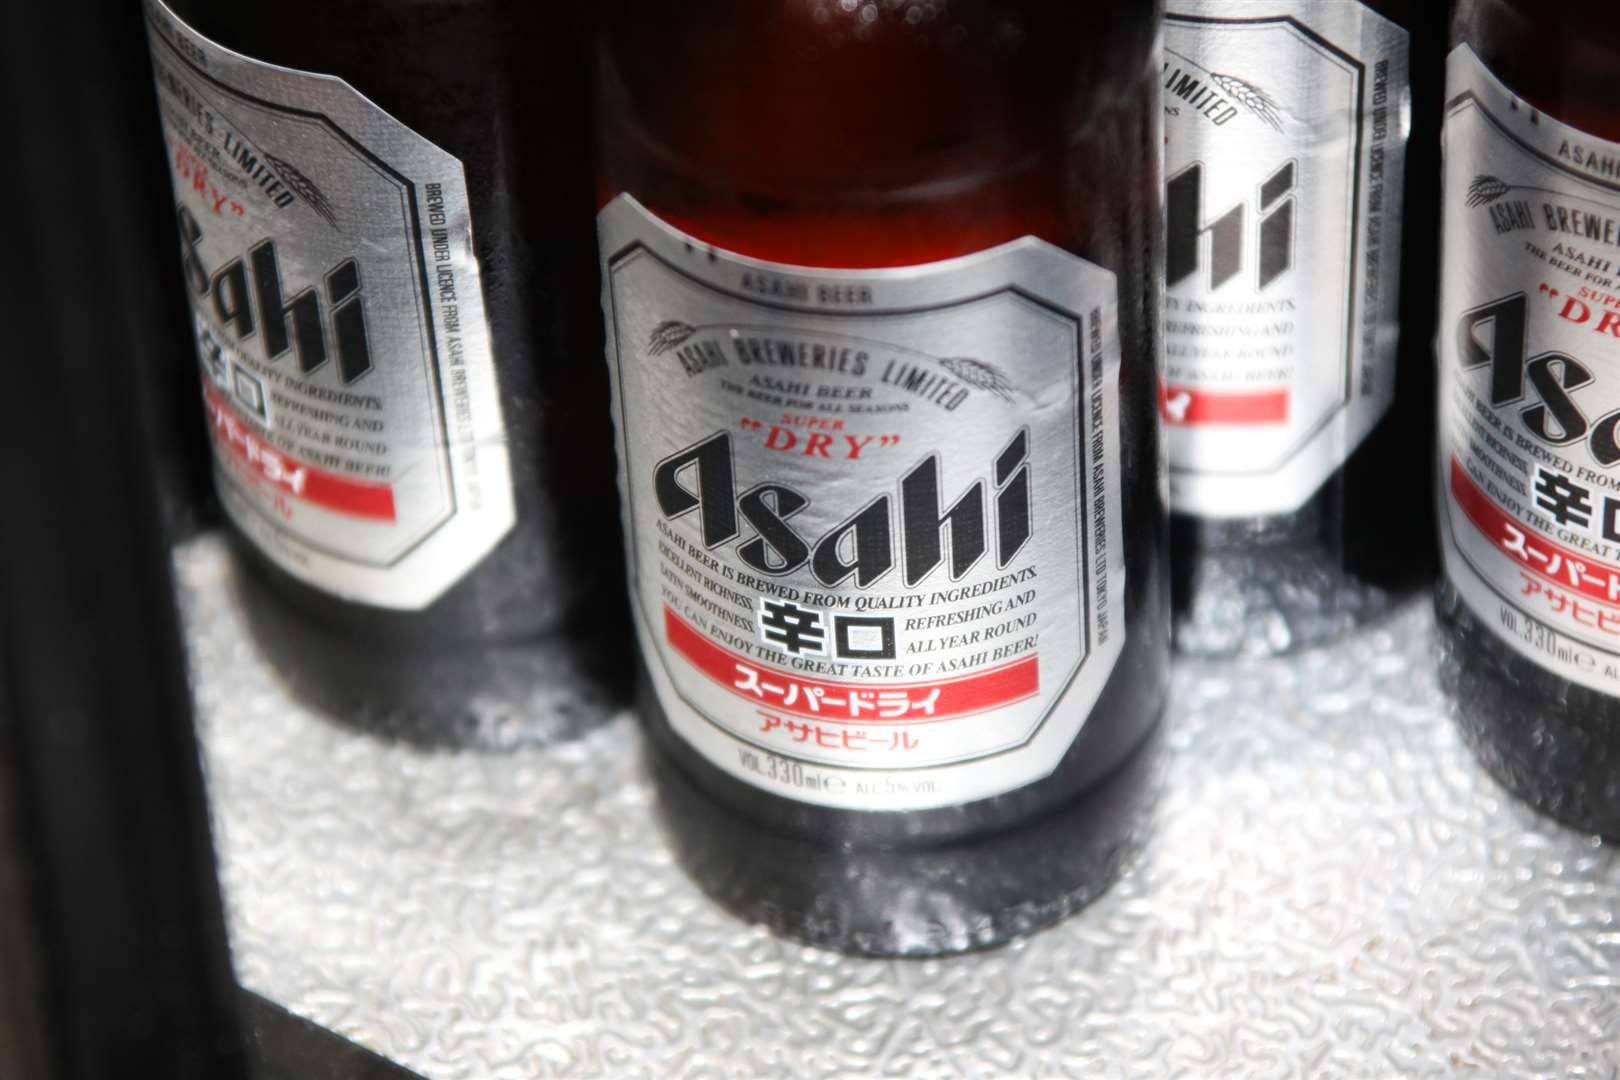 Shepherd Neame been given an award for its Asahi beer